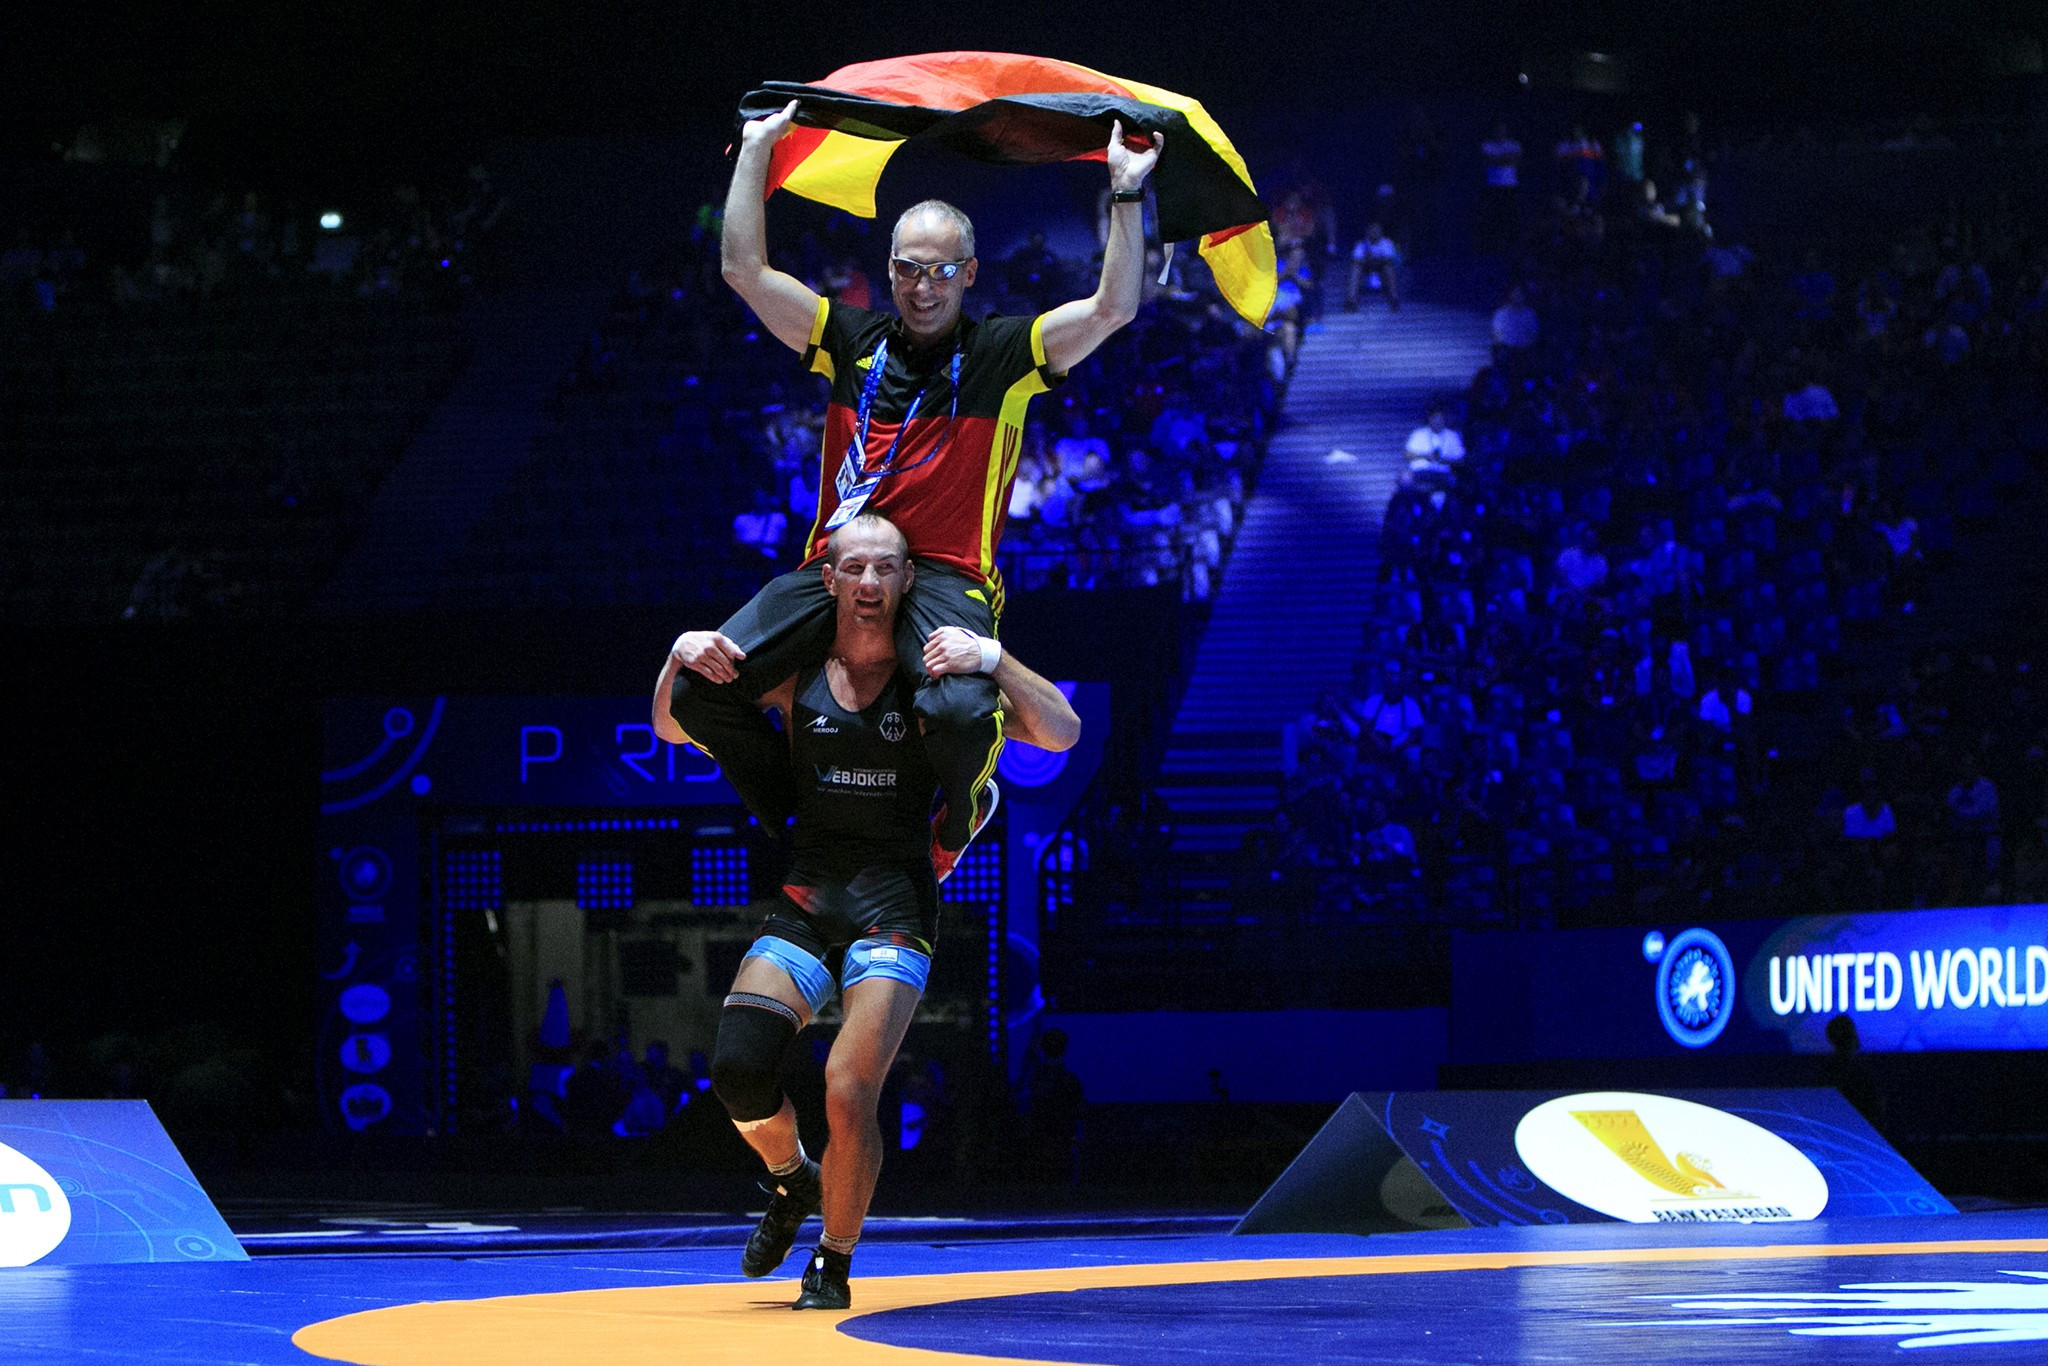 Stäbler celebrated his victory at 71kg along with his coach ©UWW